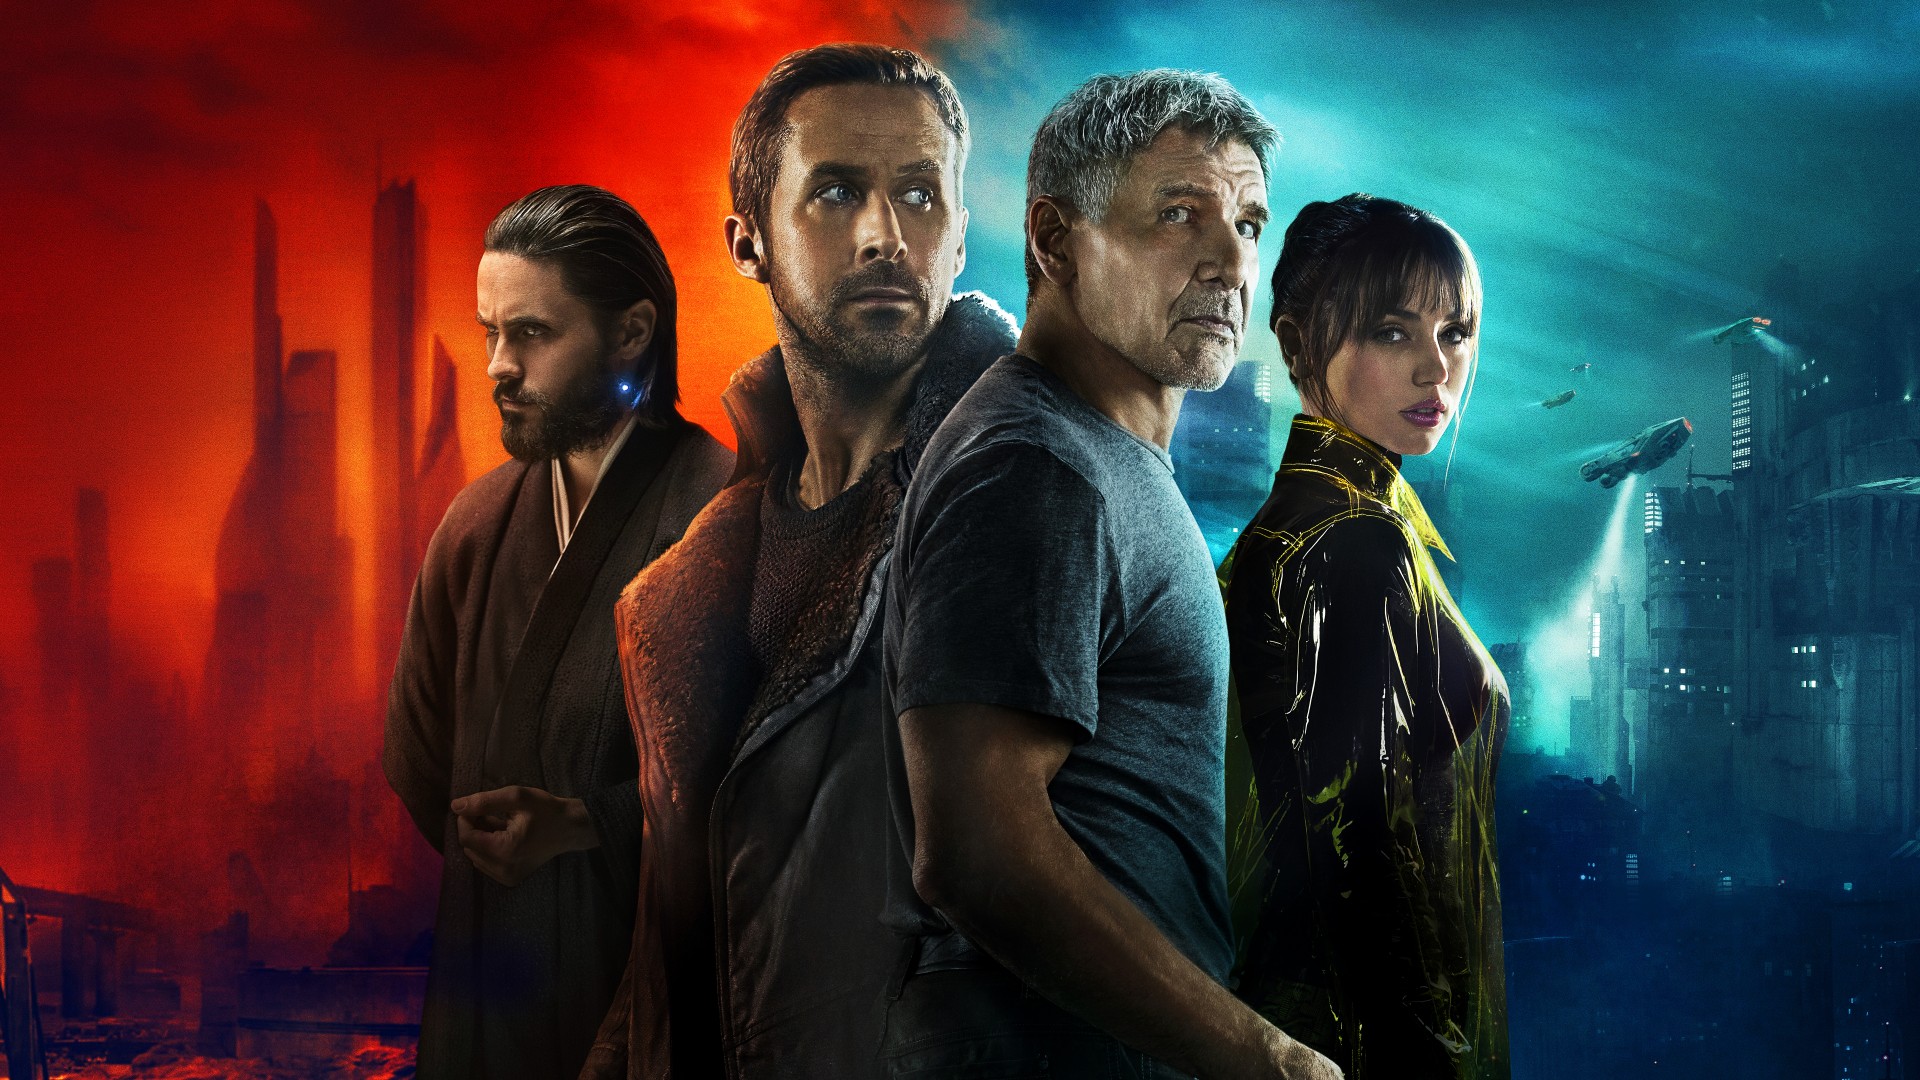 People 1920x1080 Blade Runner Blade Runner 2049 Jared Leto Harrison Ford Ryan Gosling Ana de Armas Joi Rick Deckard Officer K Niander Wallace red cyan blue actor actress movies movie characters